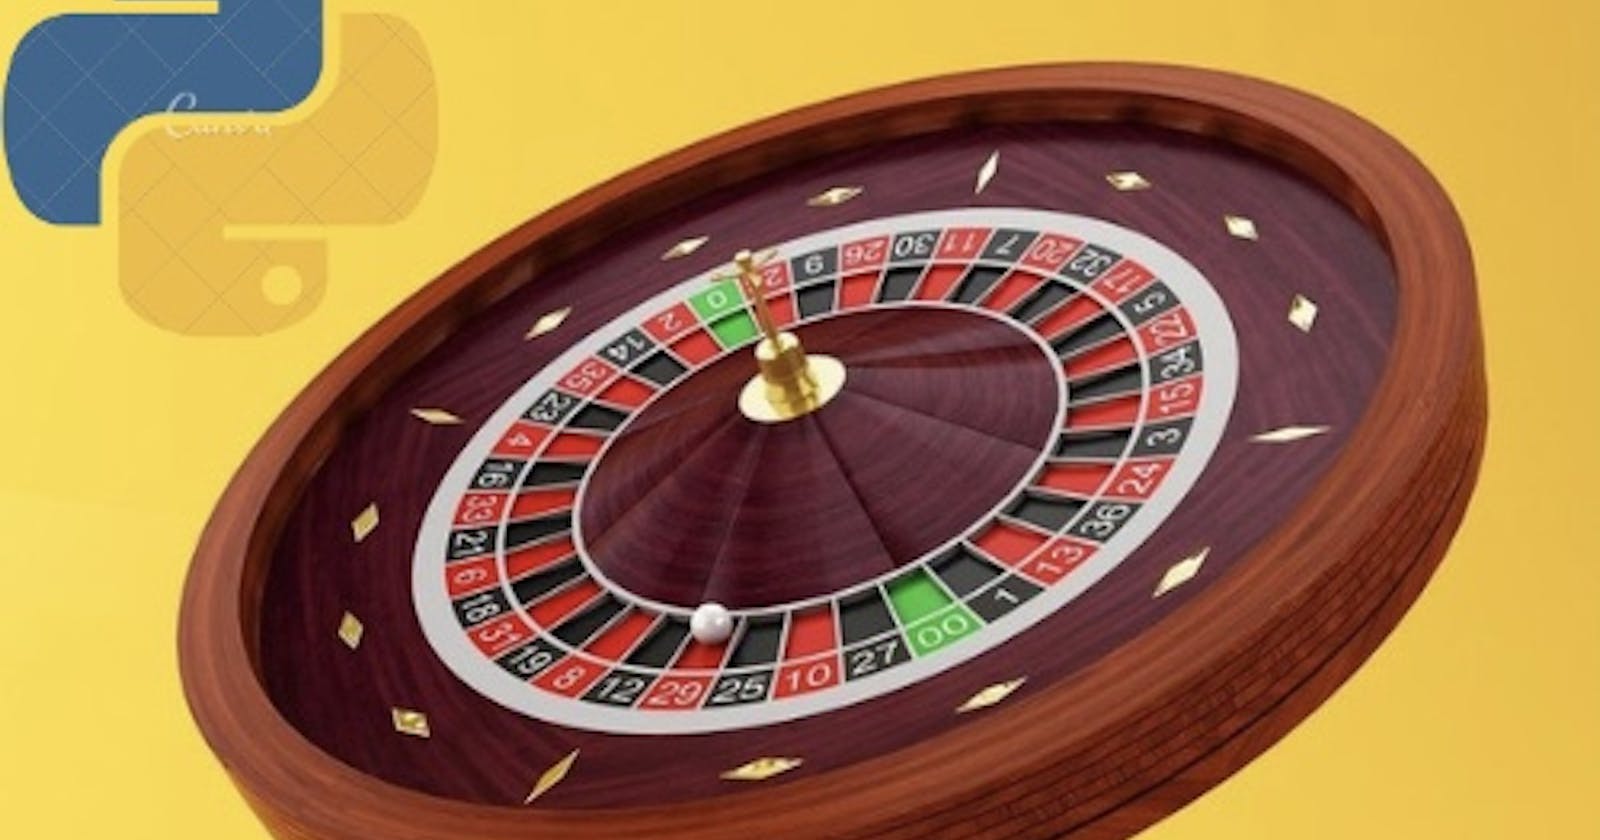 How to code a roulette payout simulation using Python